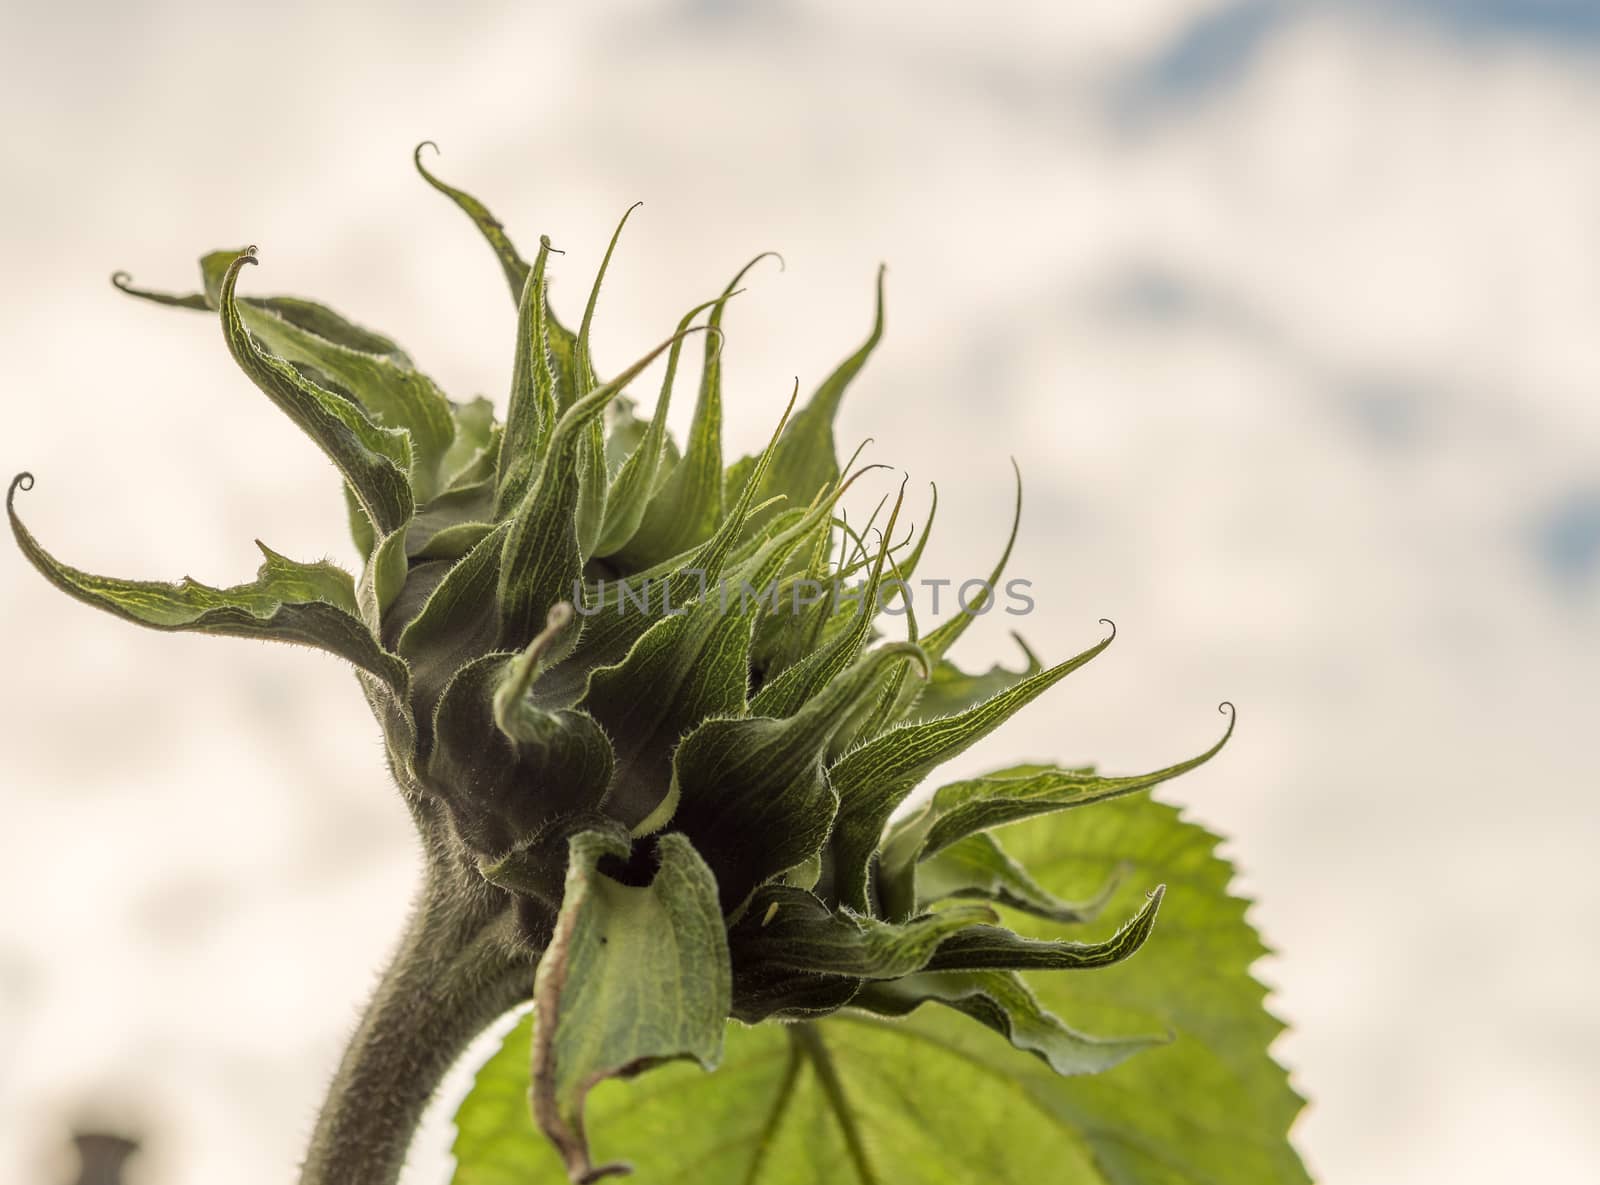 Looking up at a giant sunflower before bloom by frankhoekzema